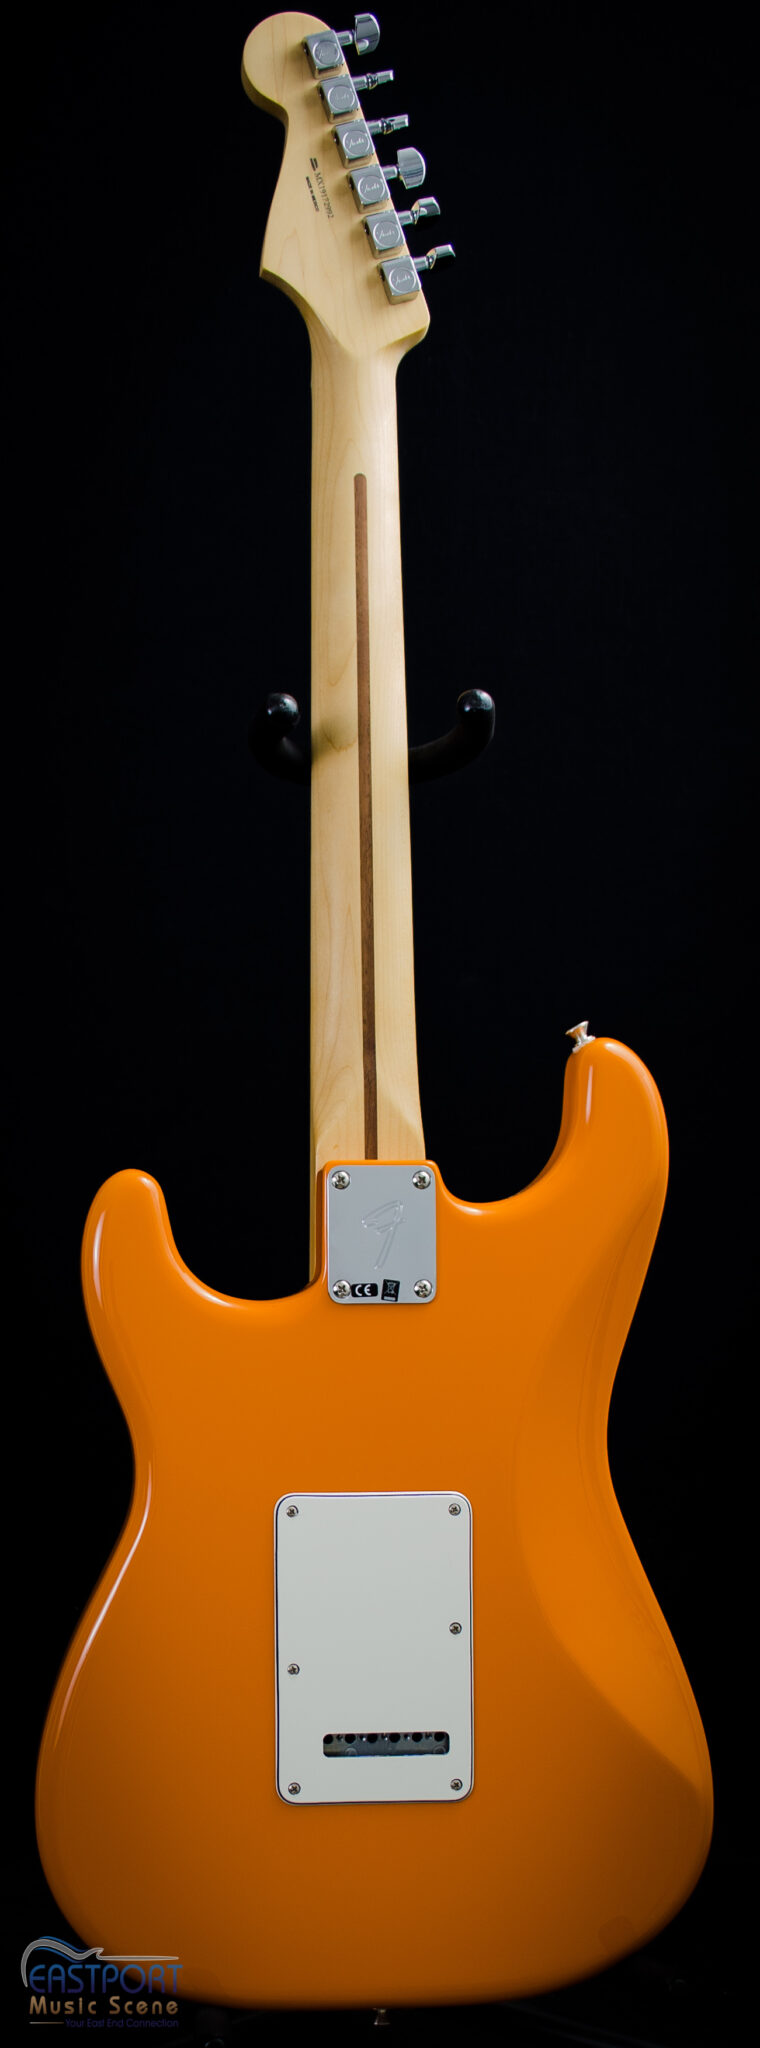 A close up of the back end of an orange electric guitar.